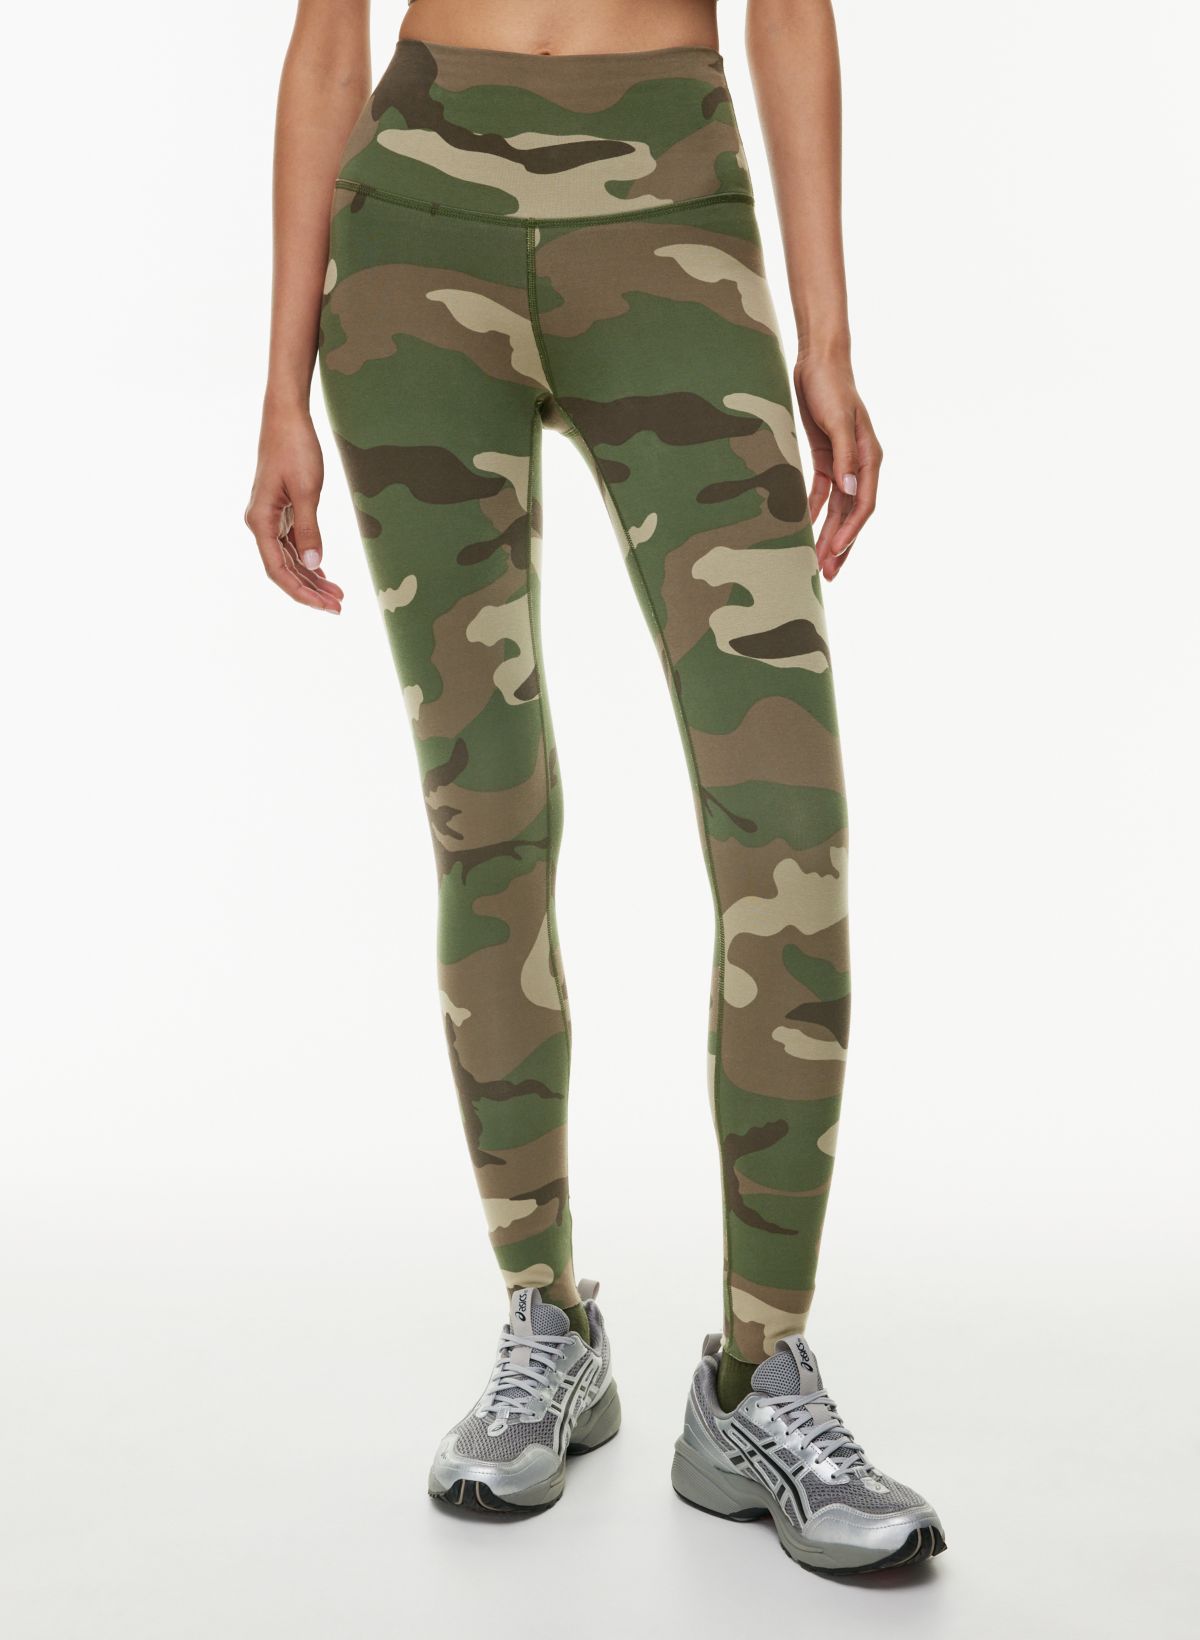 Green Camo Army Design - Military Themed - Stretchy Leggings at